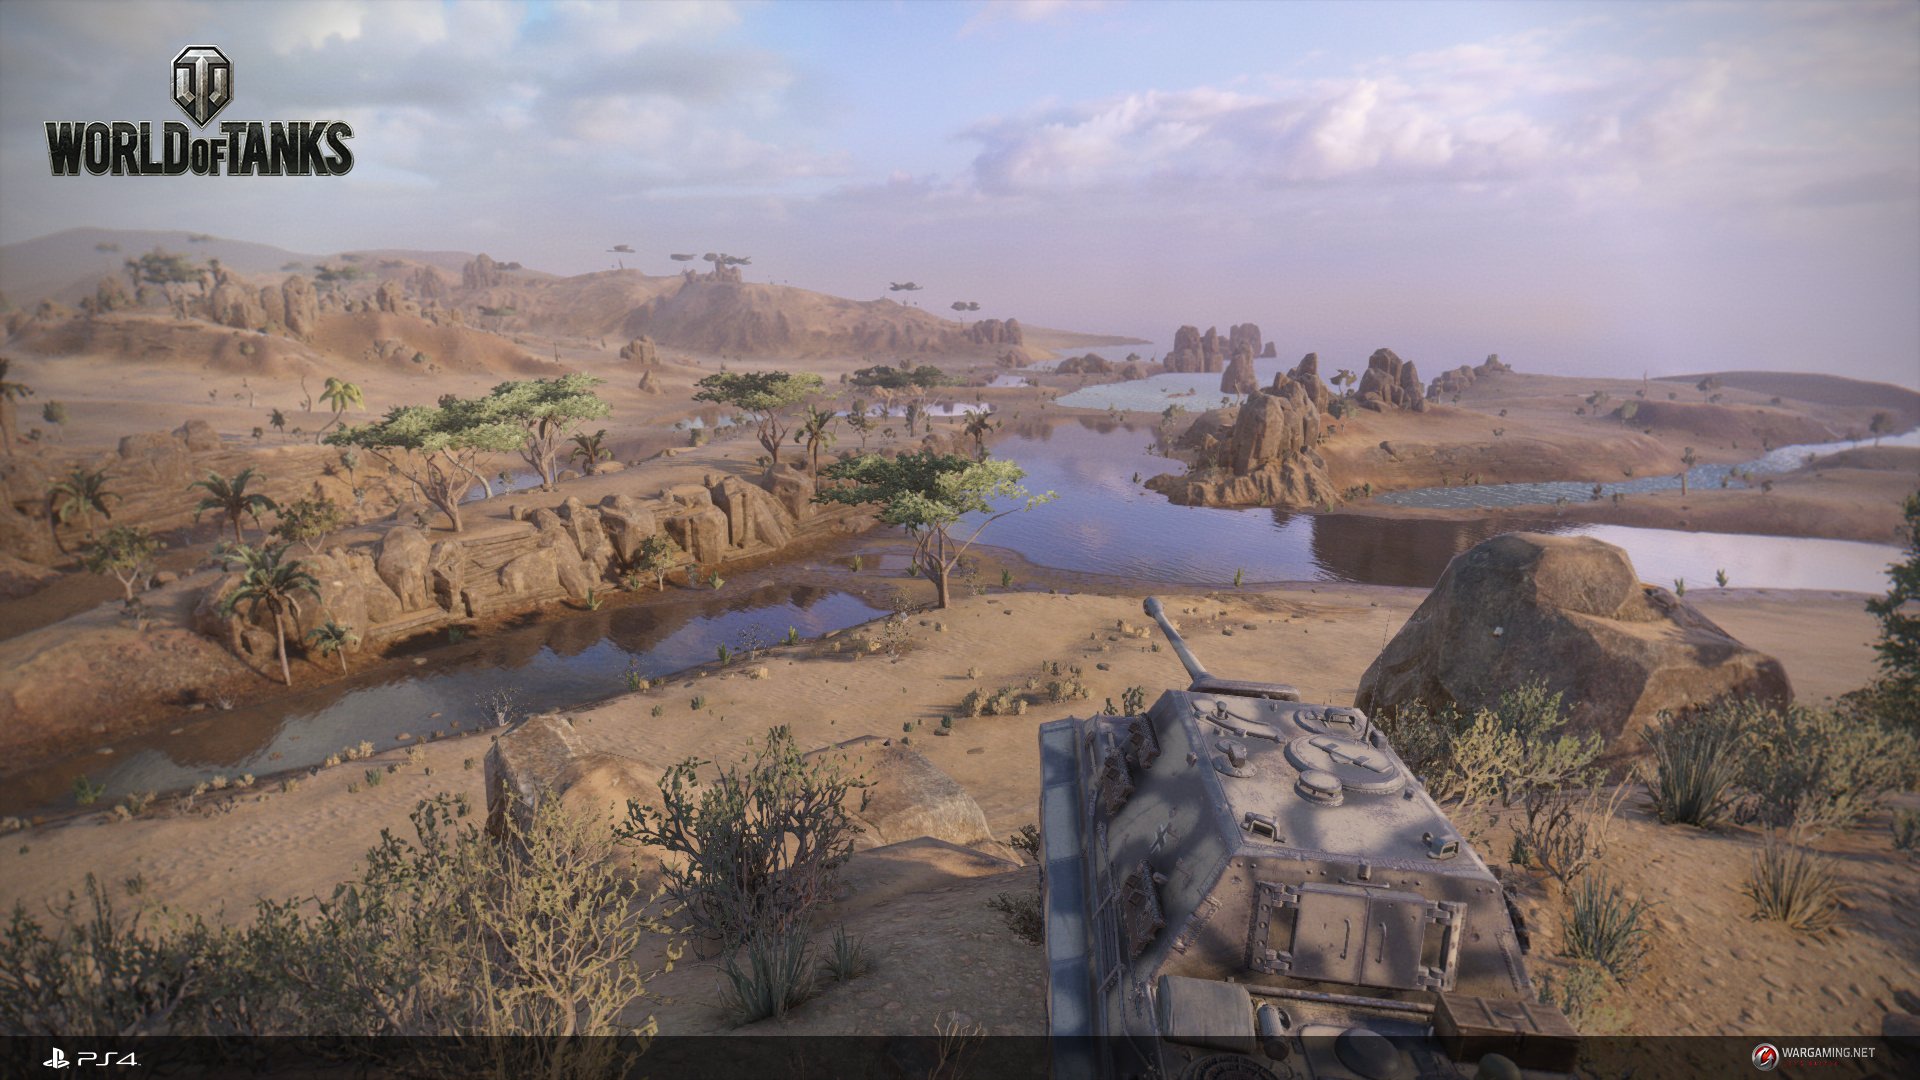 World of Tanks (PS4 / PlayStation 4) Game Profile | News, Reviews